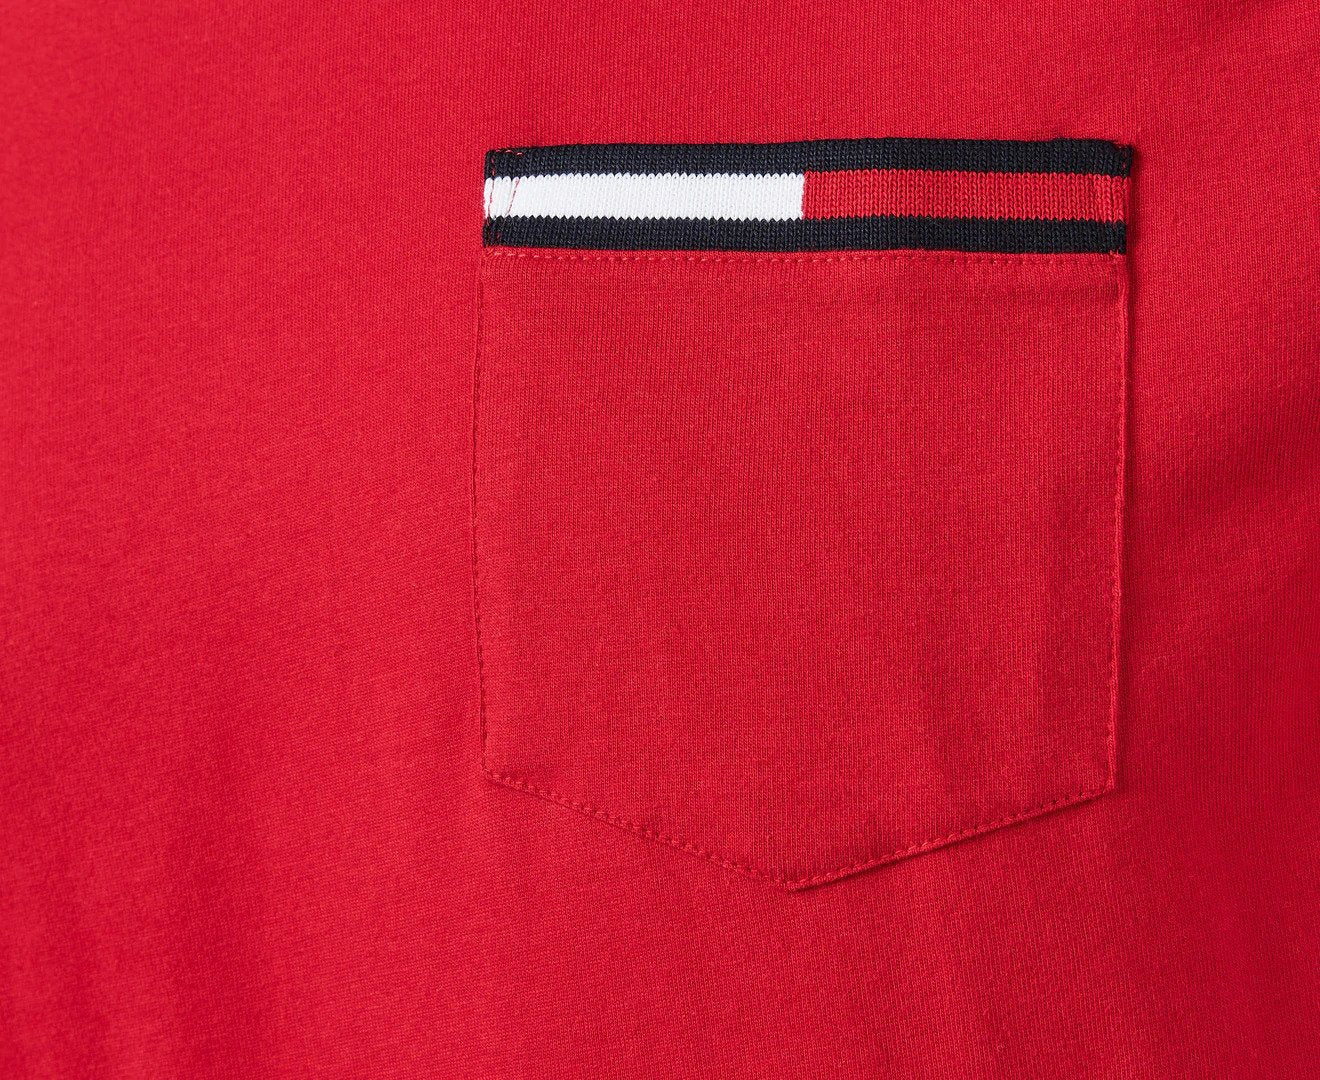 Tommy Hilfiger Men's Icon Short Sleeve Pocket Tee / T-Shirt / Tshirt - Primary Red